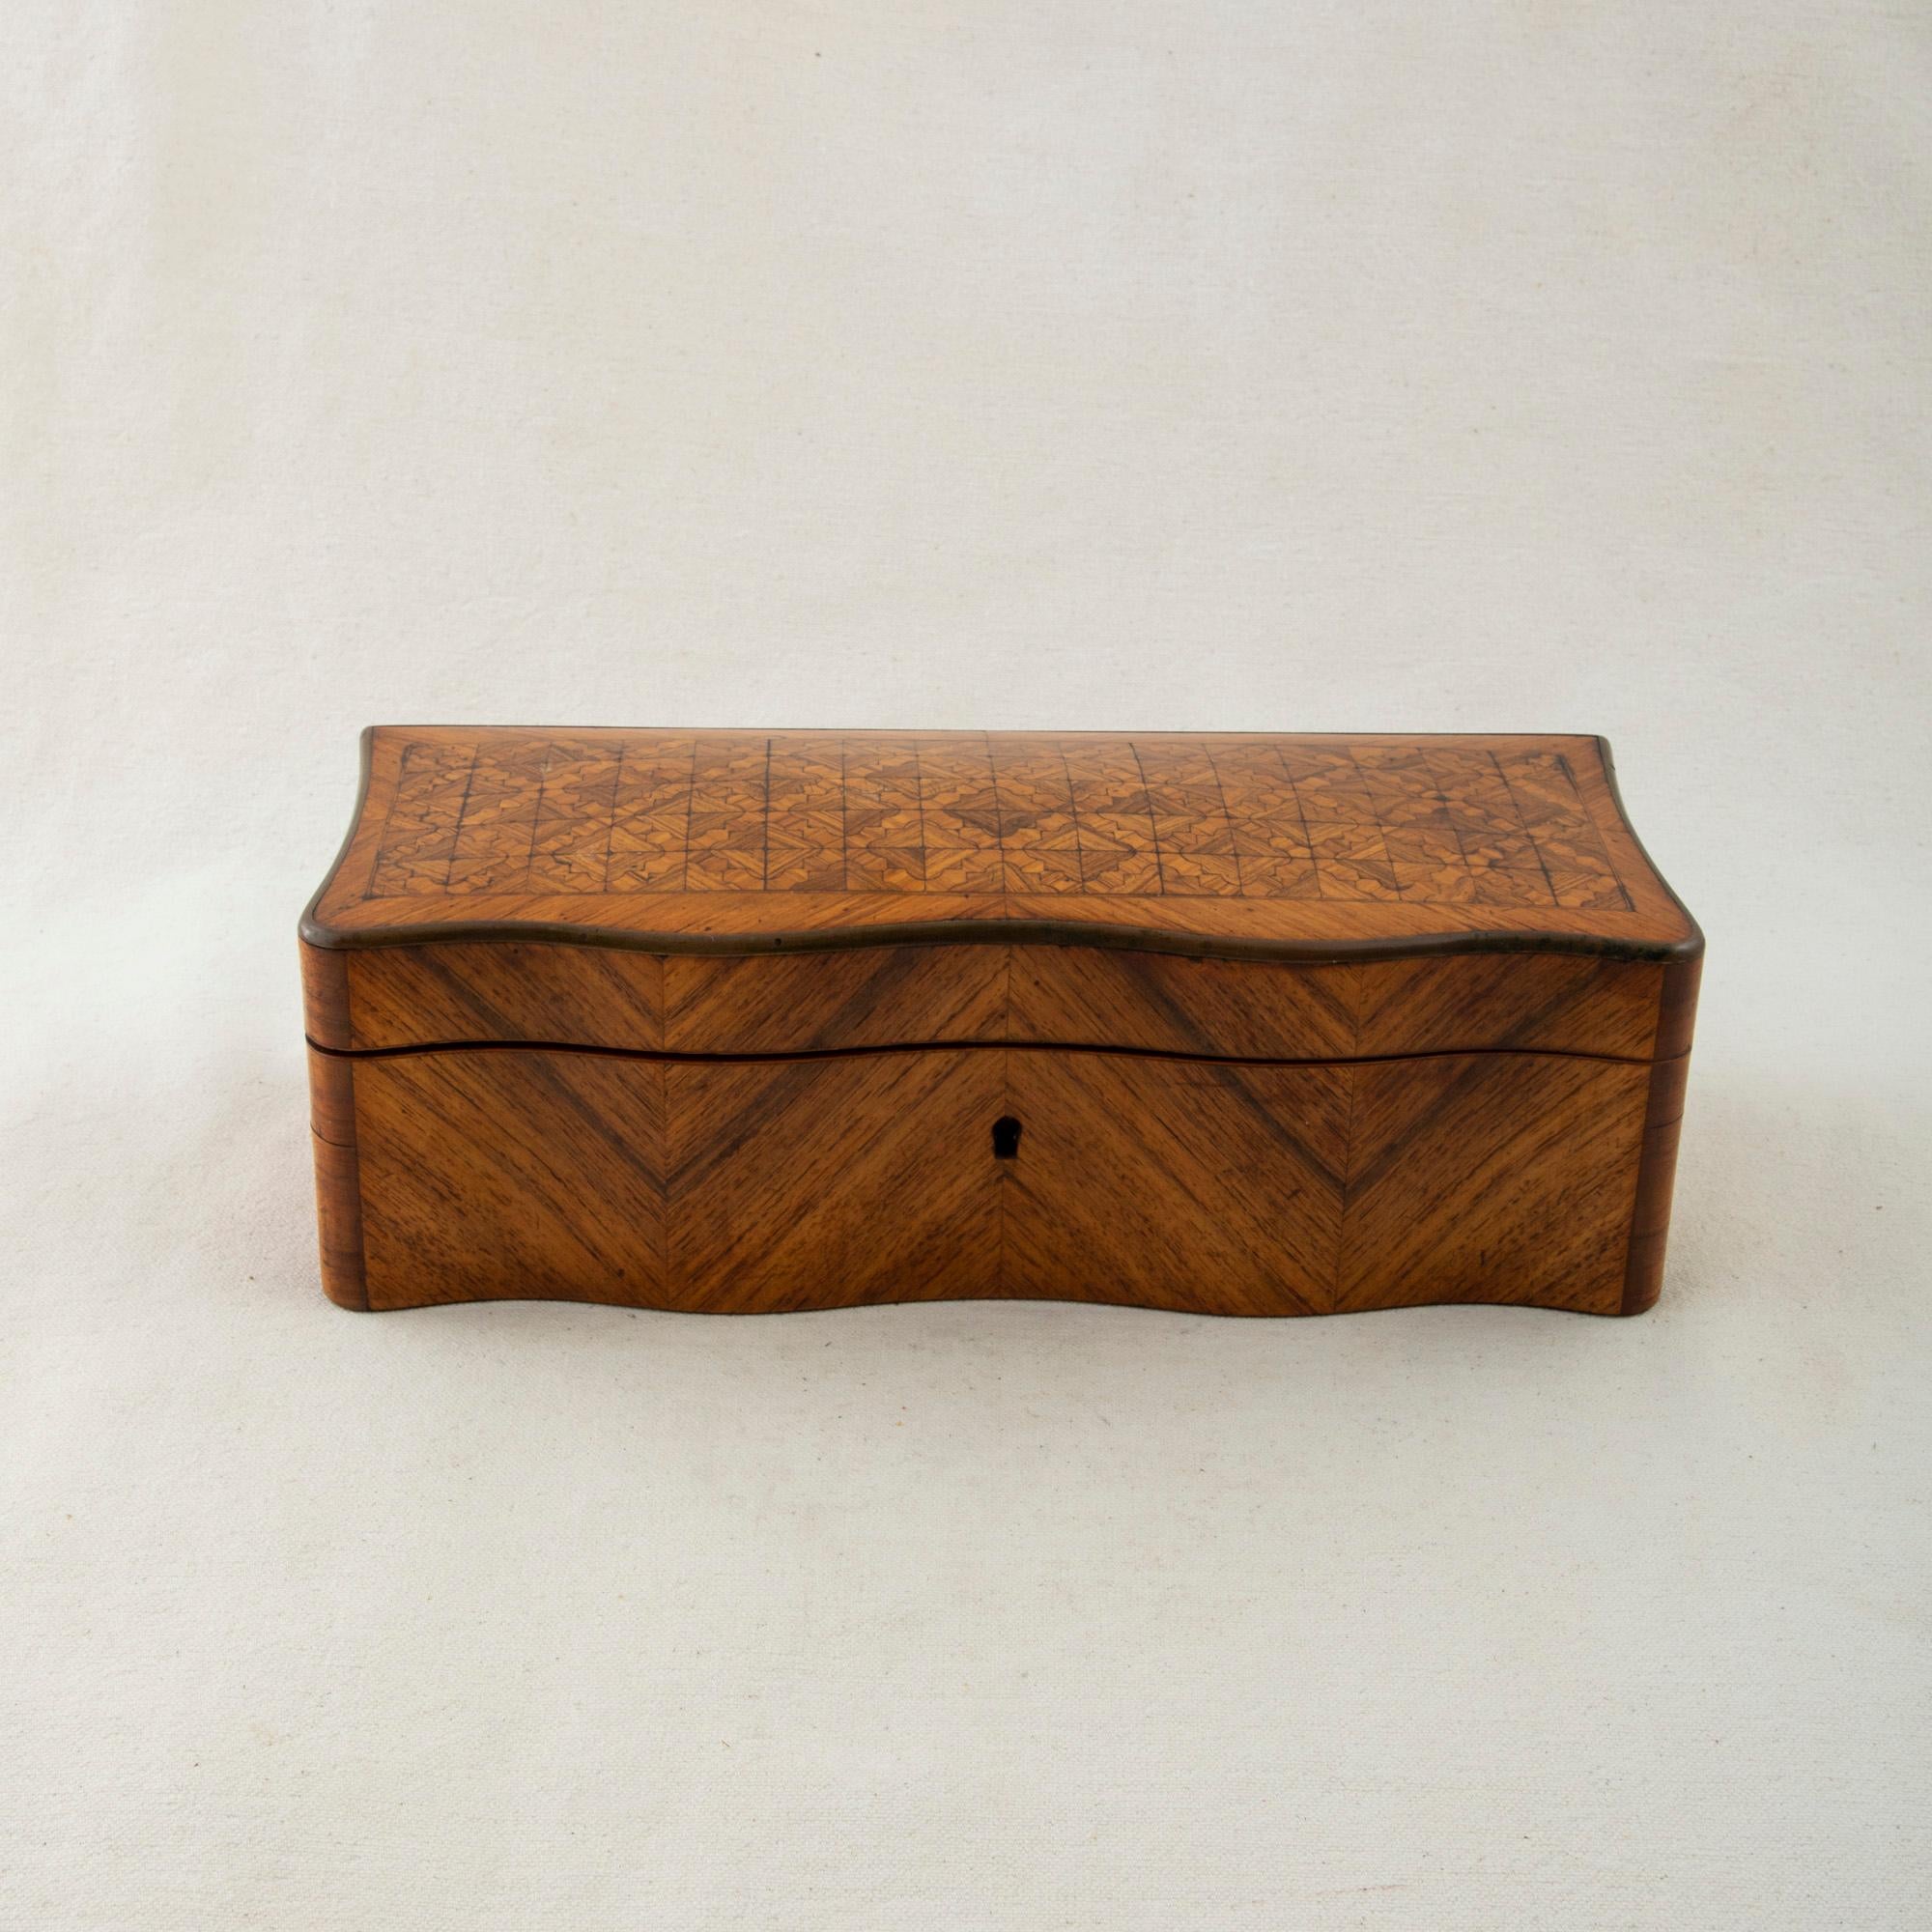 This mid-nineteenth century French Napoleon III period glove box is made of rosewood and features a curved front and an intricate geometric diamond pattern inlaid into the top. The sides display a chevron pattern. It is accented with a bronze band